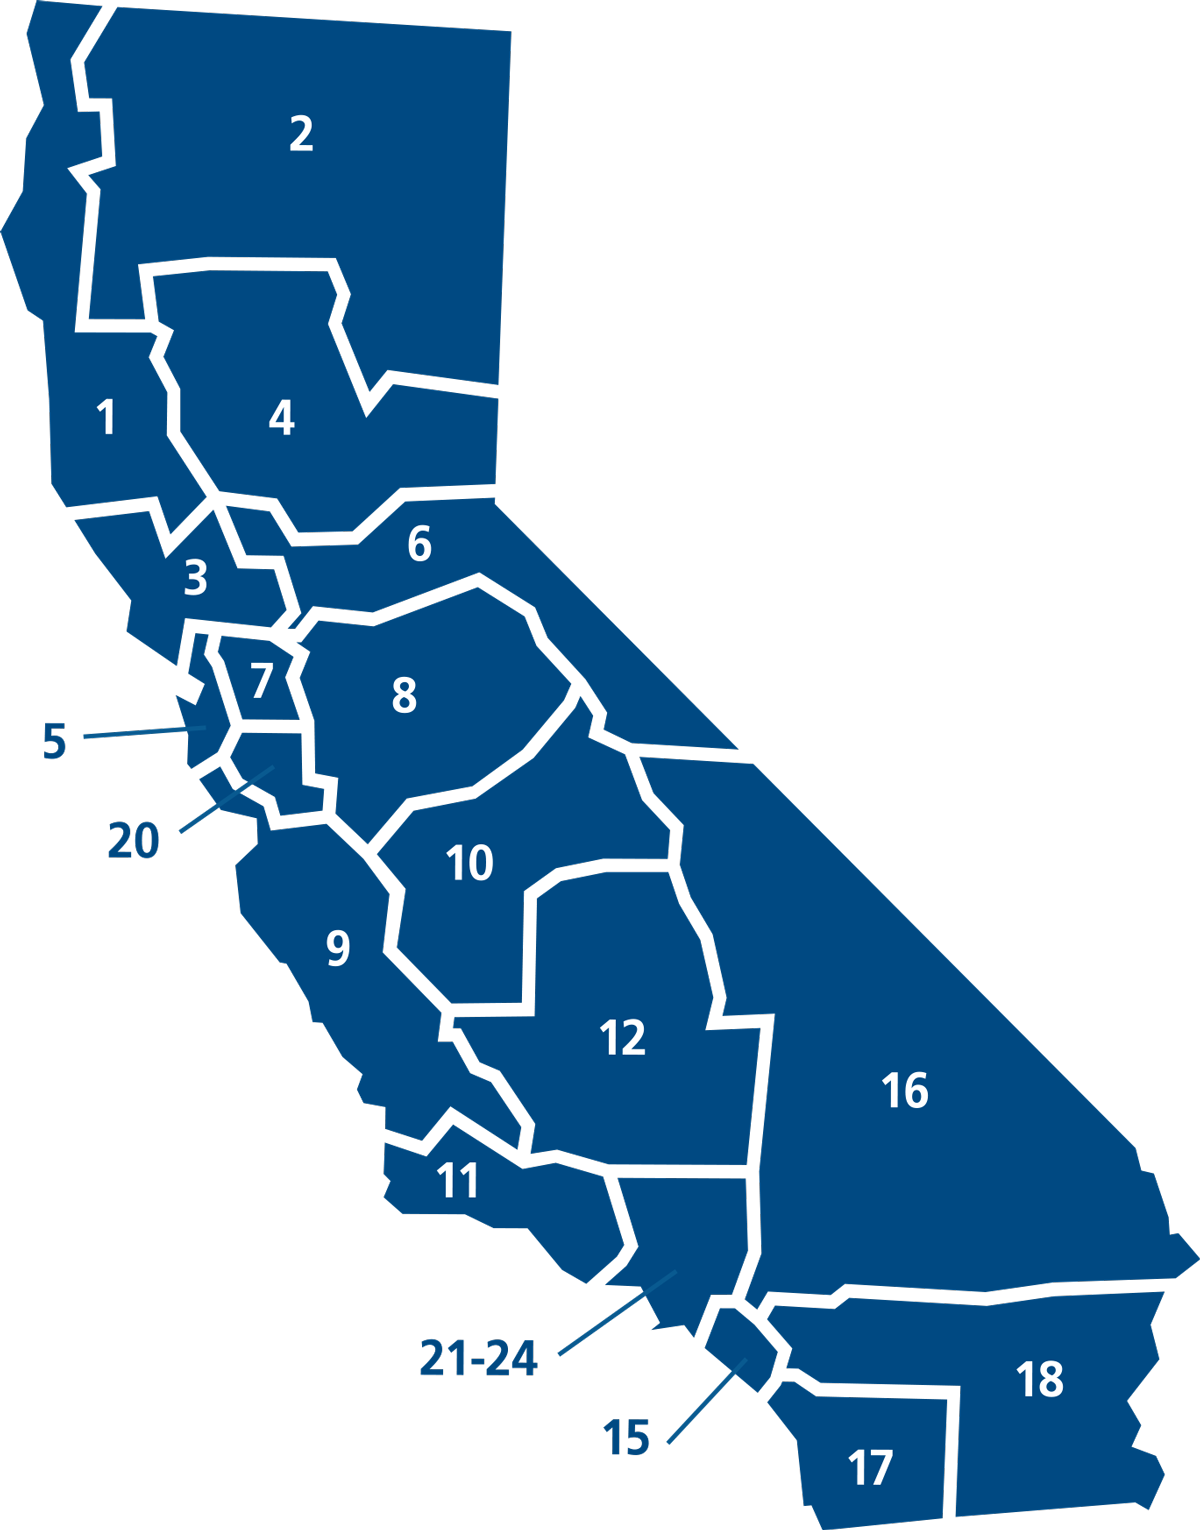 a simple map of California broken into number labeled districts